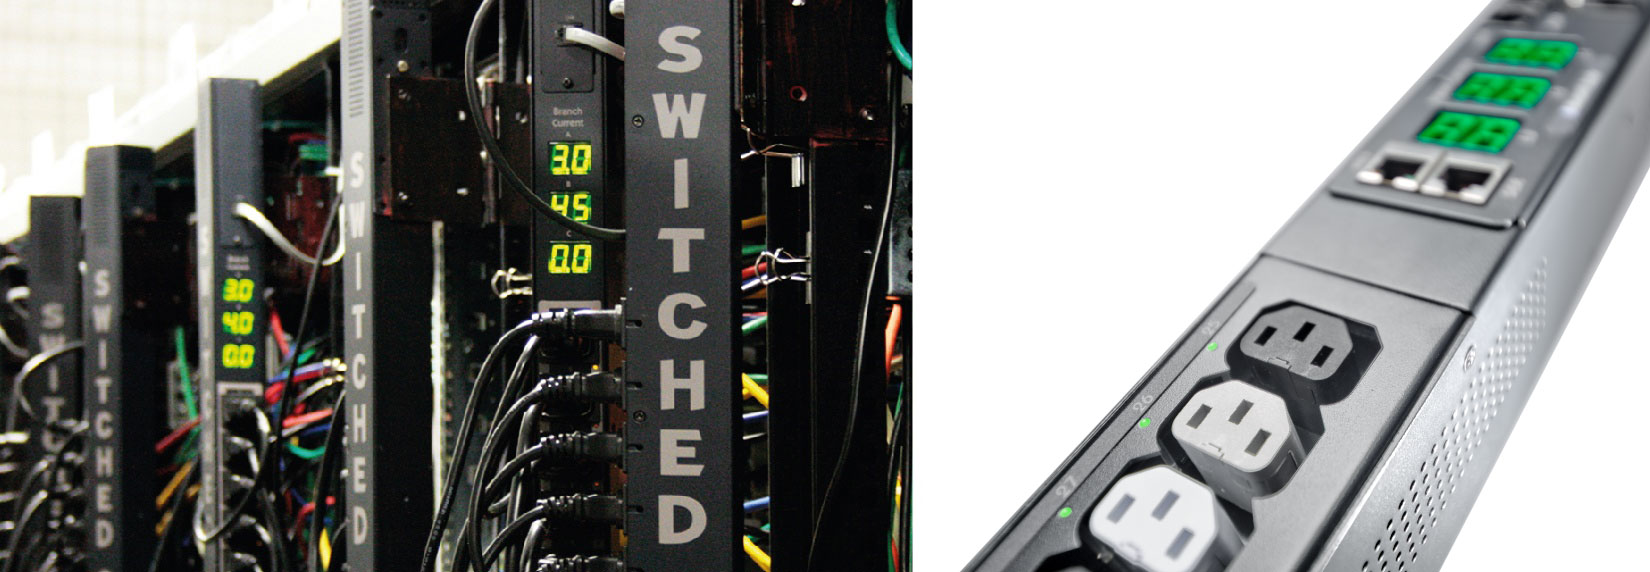 top-reasons-to-use-switched-pdus-in-your-data-center - https://cdn.buttercms.com/pNwkCfS6TsOCkVSh4UvW